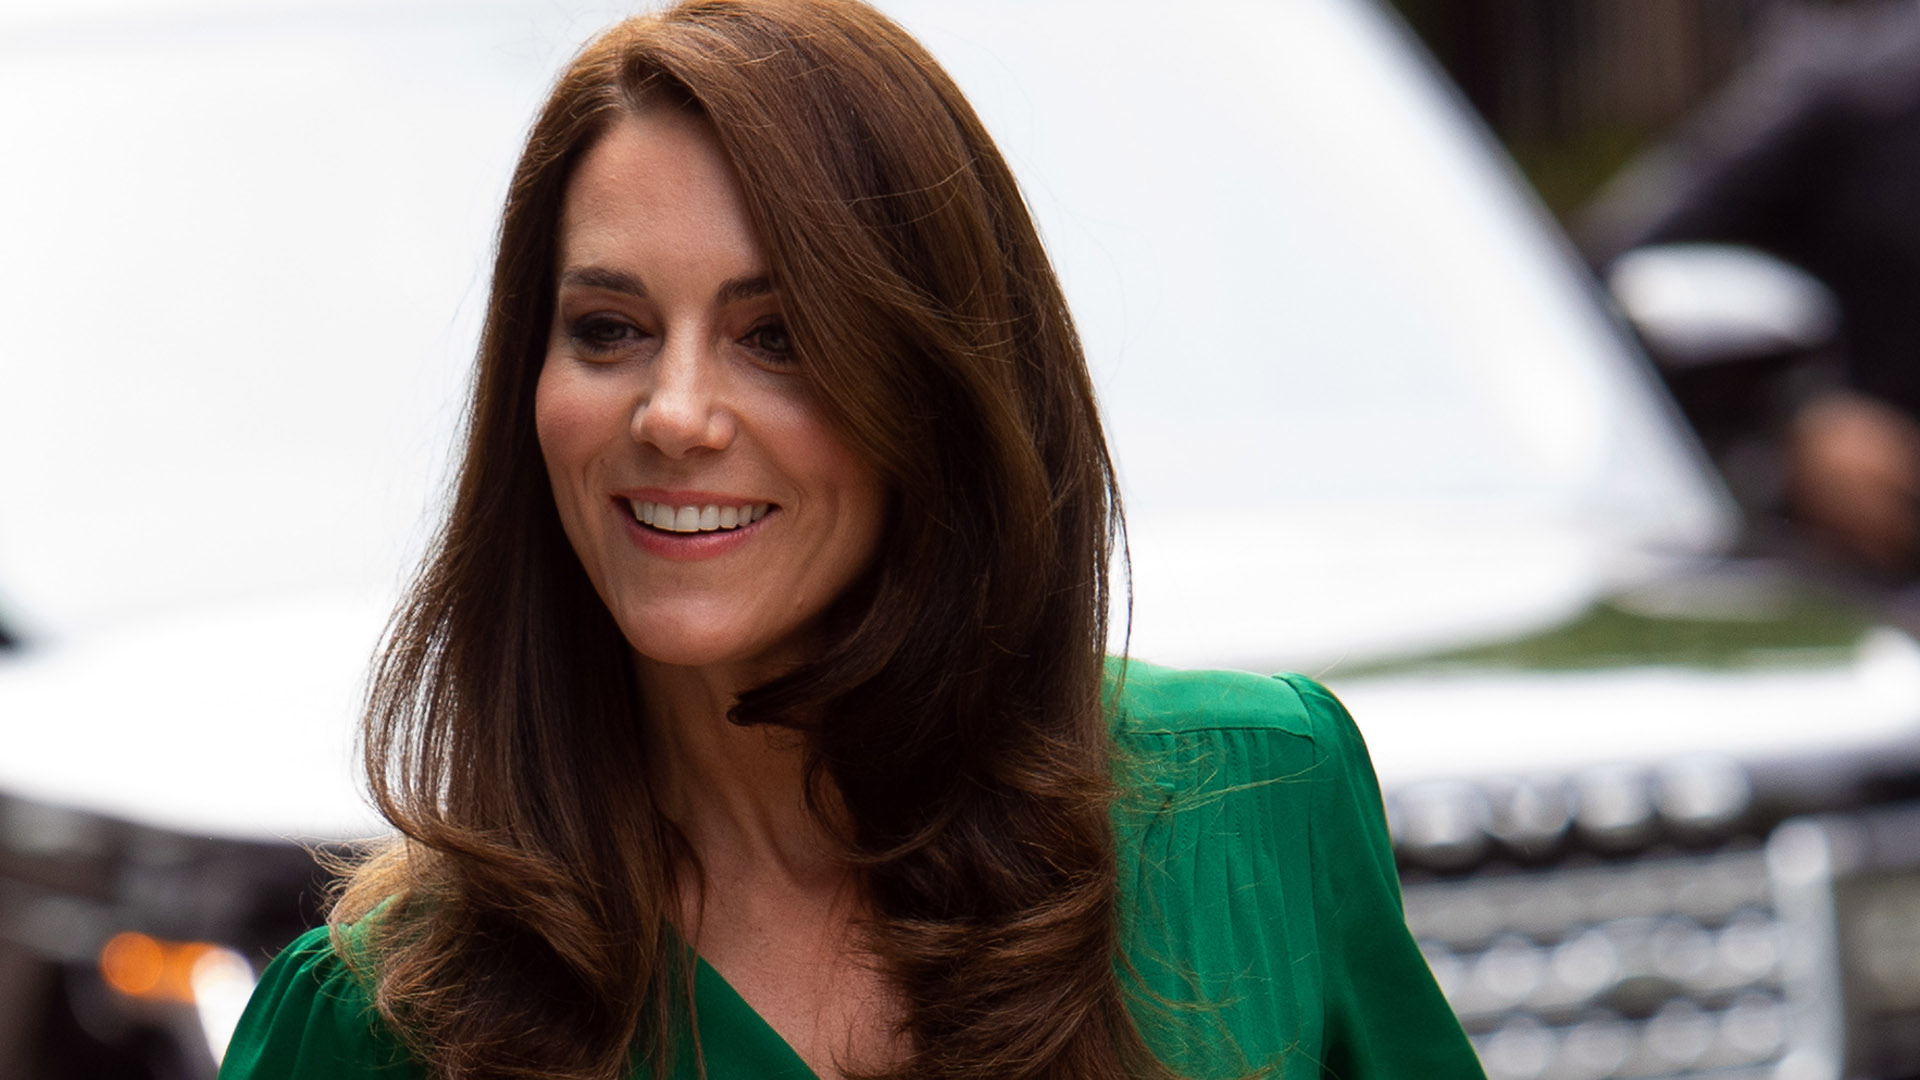 Will Kate Middleton Be Queen or Queen Consort? Royal Rule Explained